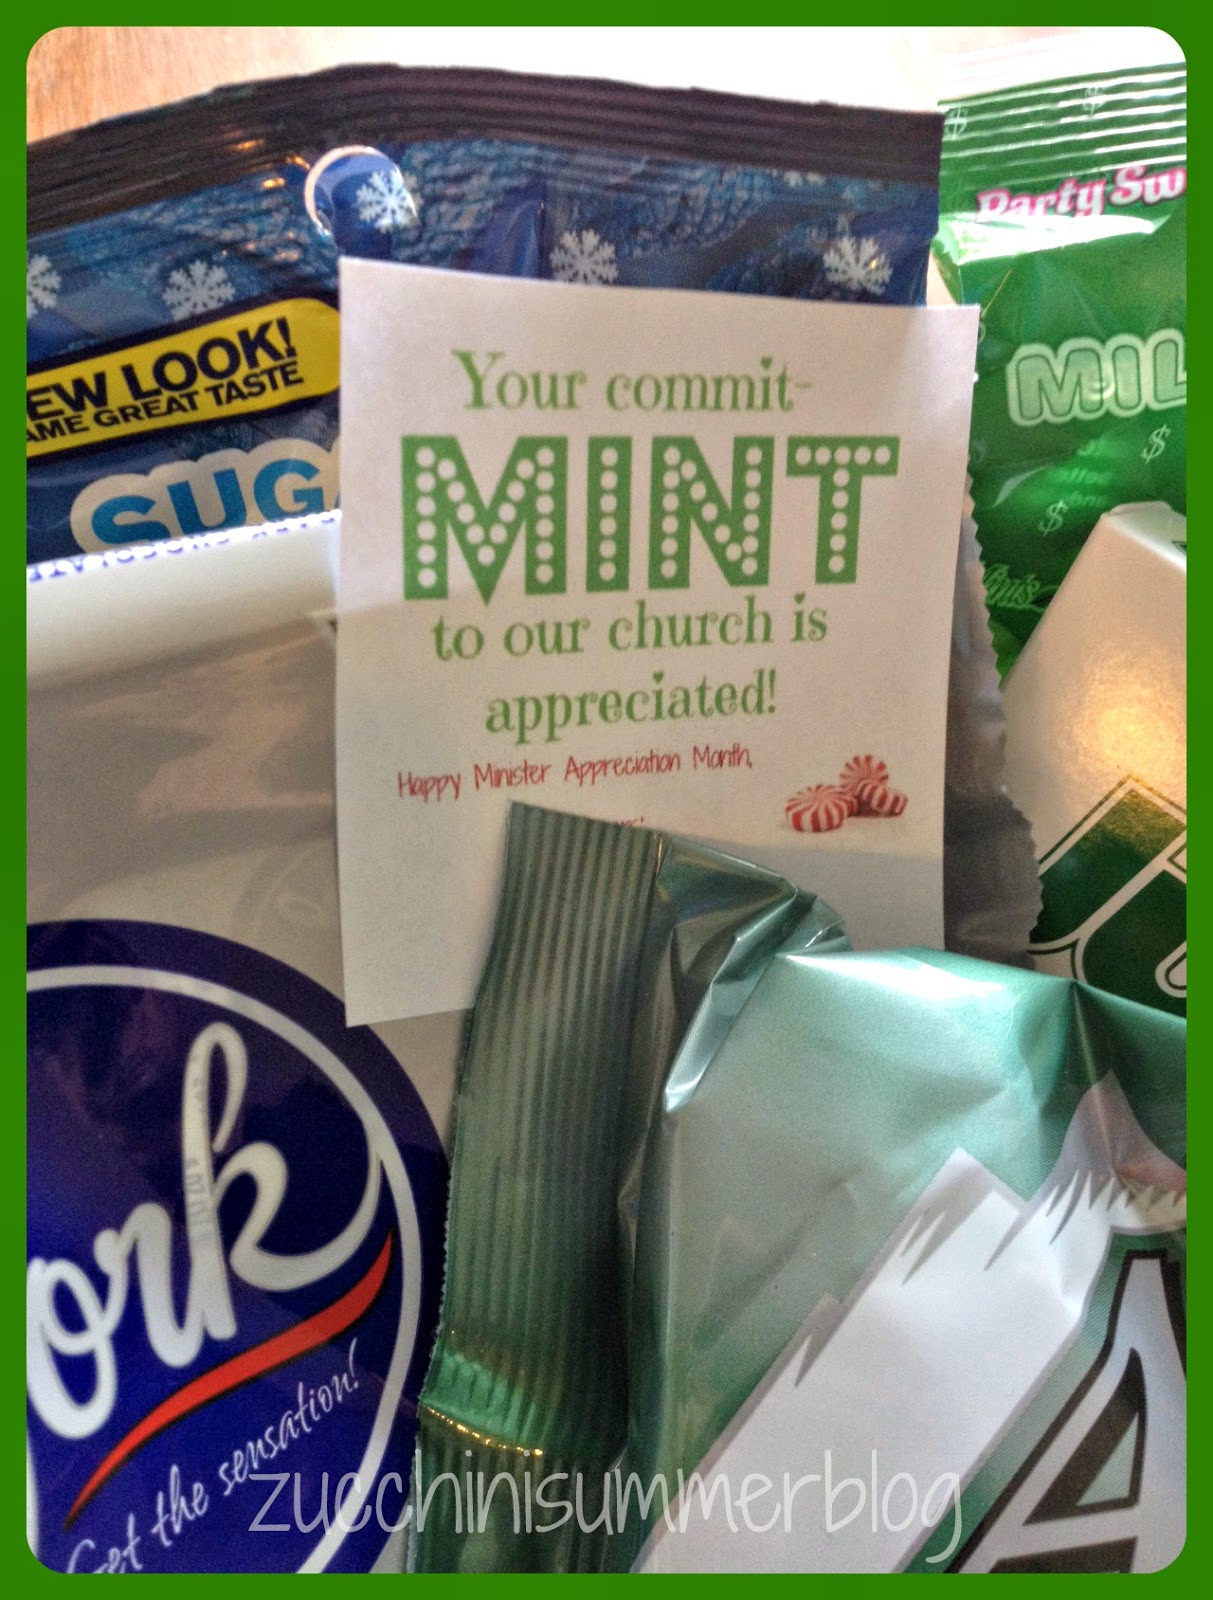 Gift Ideas For Pastor Anniversary
 Zucchini Summer mit MINT to Church Minister